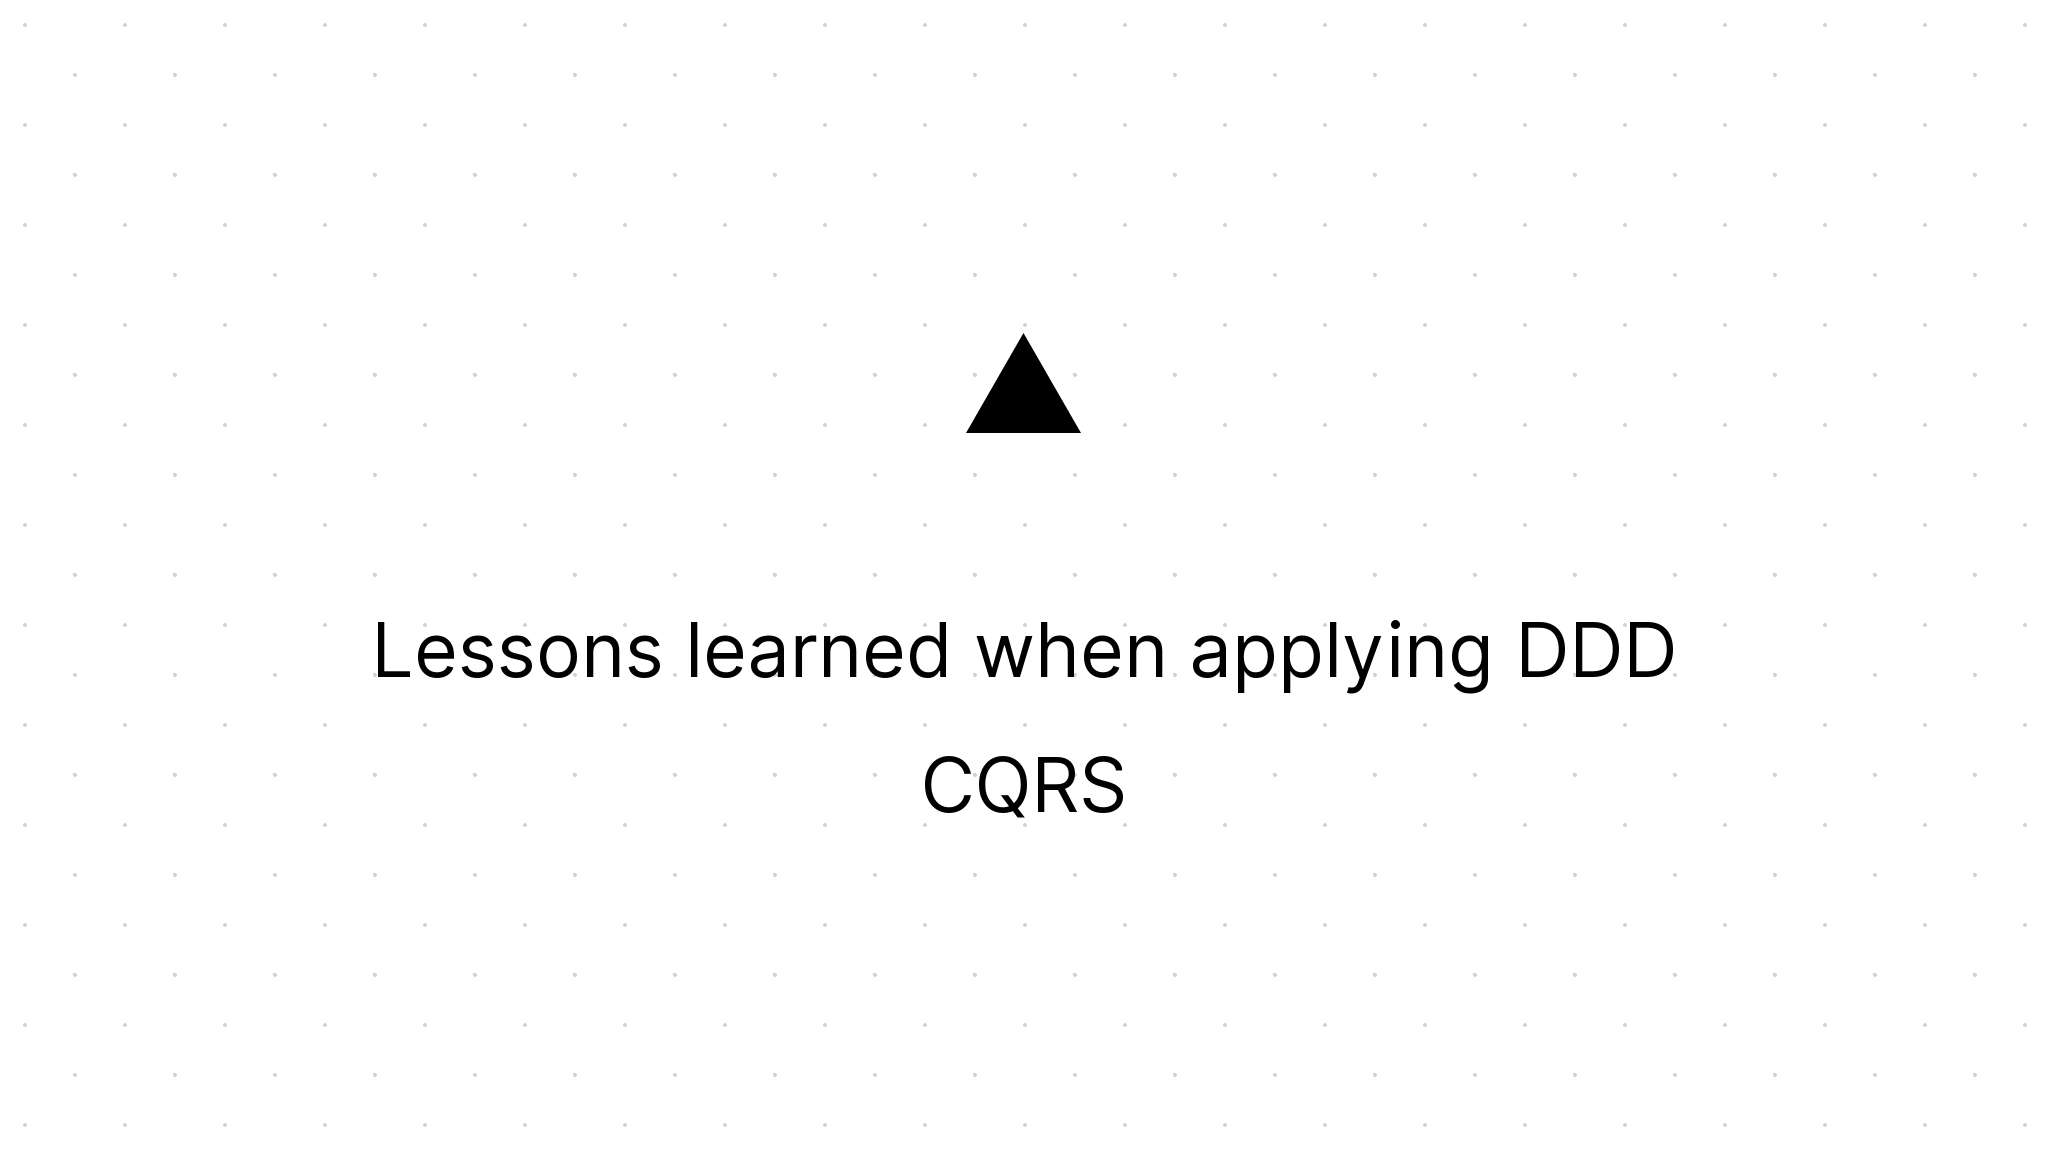 Cover Image for Lessons learned when applying DDD CQRS